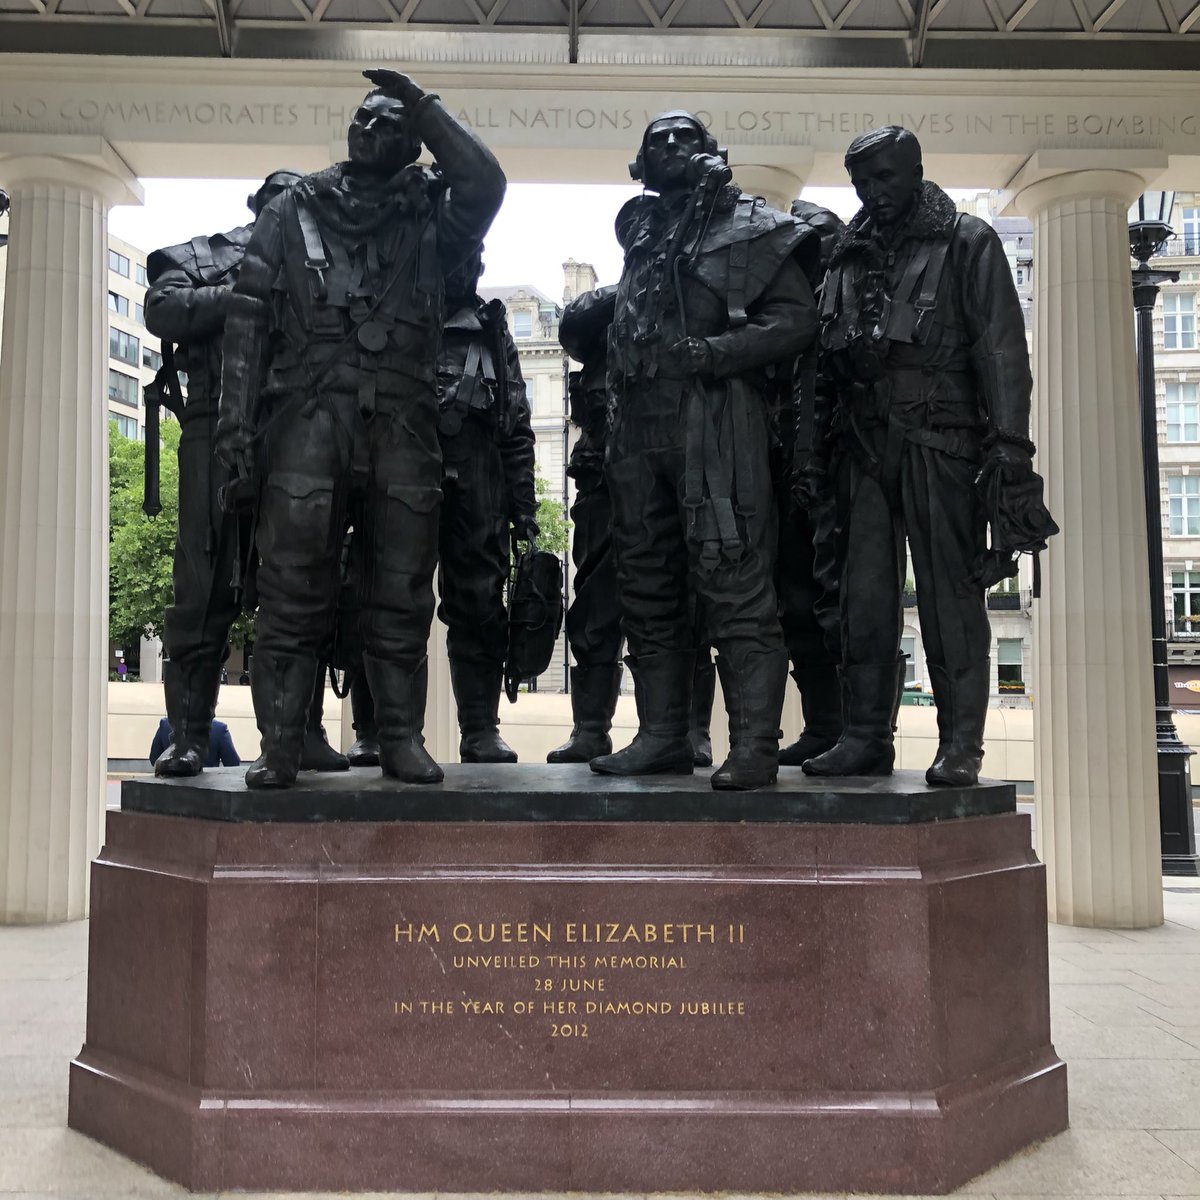 I couldn’t come to London without visiting the ‘boys’. #LestWeForget #BomberCommand